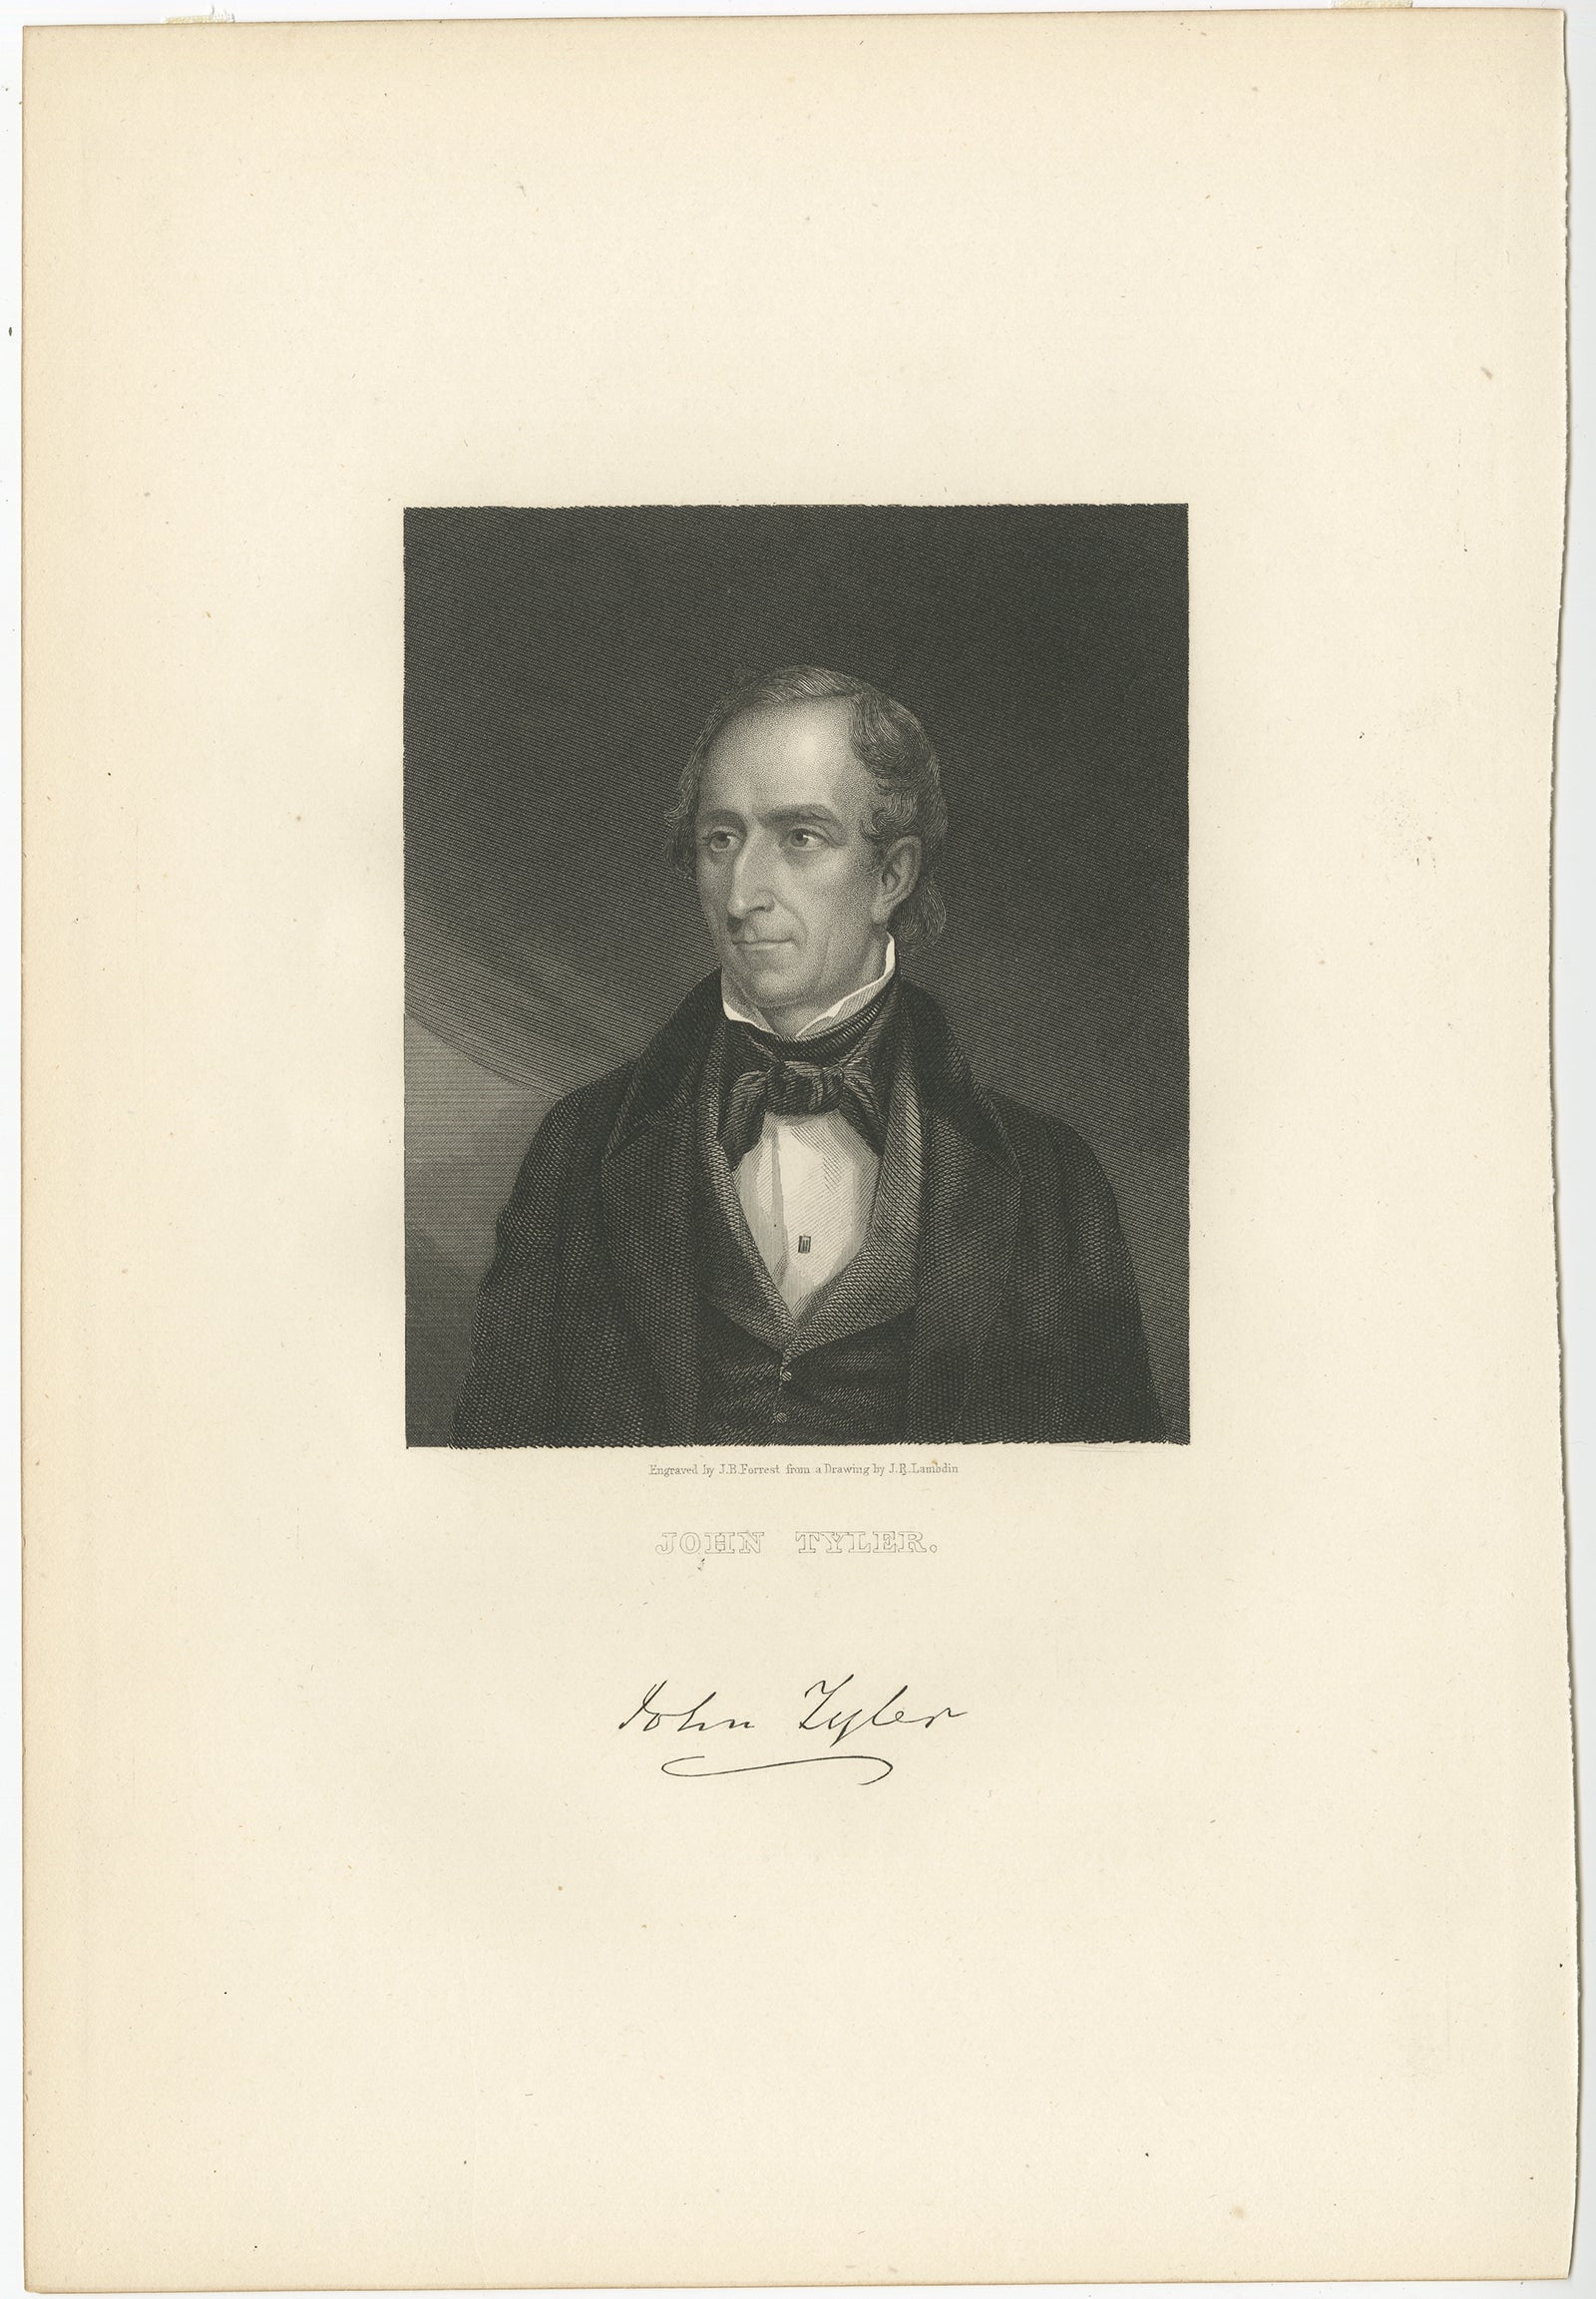 Antique print titled 'John Tyler'. Old portrait of John Tyler. 

John Tyler was the tenth president of the United States from 1841 to 1845 after briefly serving as the tenth vice president in 1841; he was elected to the latter office on the 1840